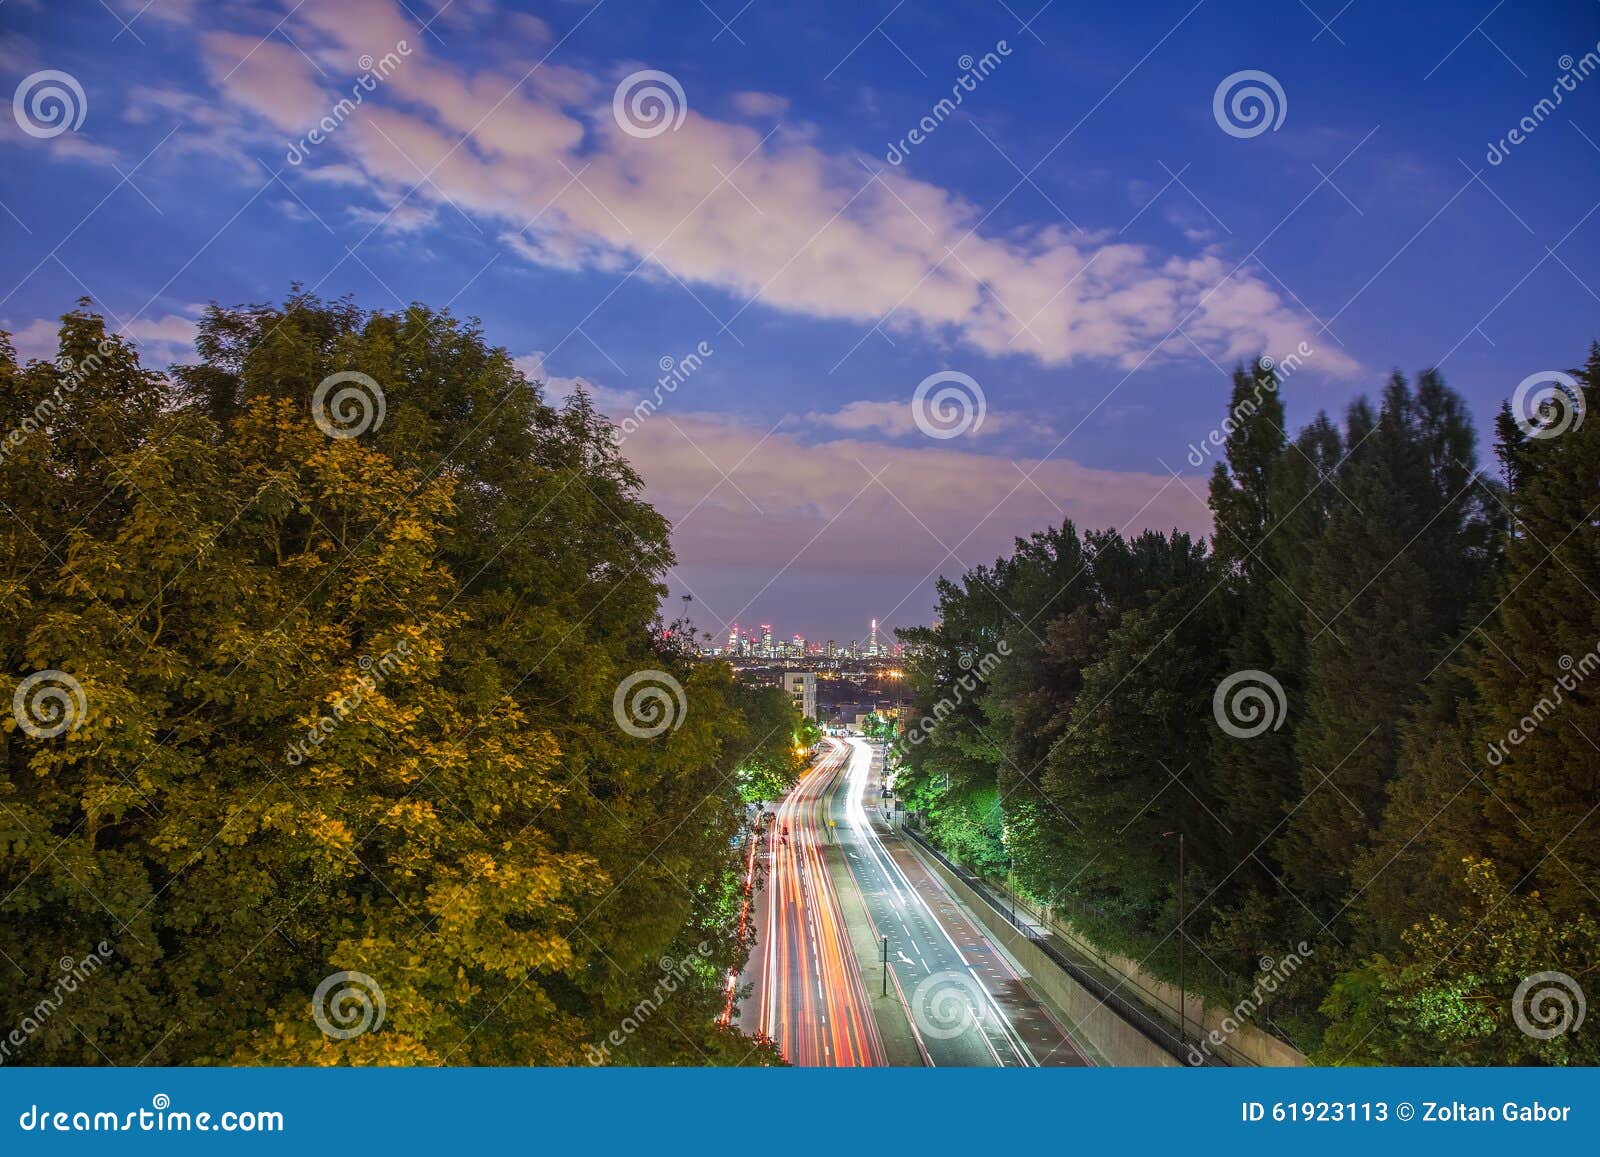 skyline of central london after sunset from holloway bridge, uk